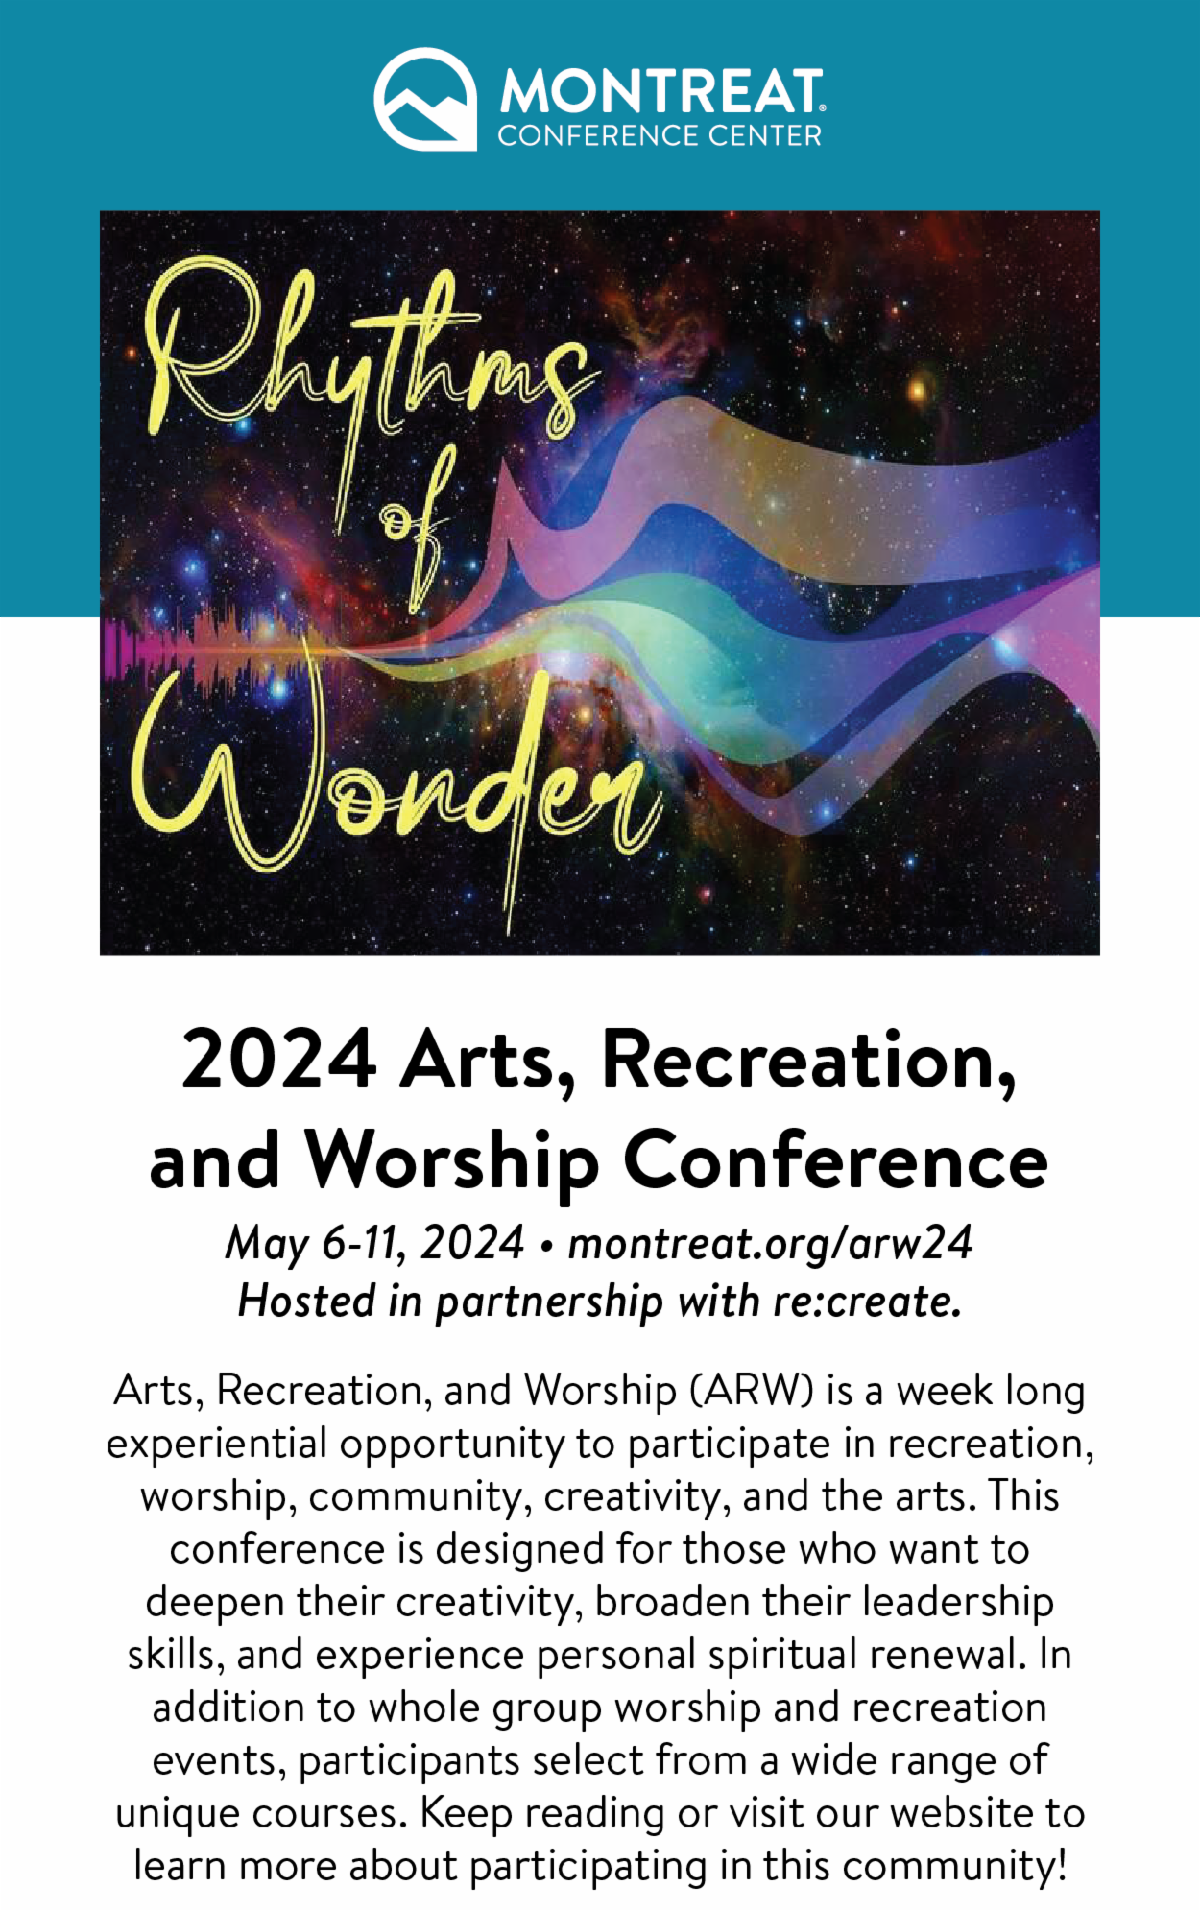 2024 Arts, Recreation, and Worship Conference: May 6-11, 2024 - Arts, Recreation, and Worship (ARW) is a week long experiential opportunity to participate in recreation, worship, community, creativity, and the arts. This conference is designed for those who want to deepen their creativity, broaden their leadership skills, and experience personal spiritual renewal. In addition to whole group worship and recreation events, participants select from a wide range of unique courses. Keep reading or visit our website to learn more about participating in this community!